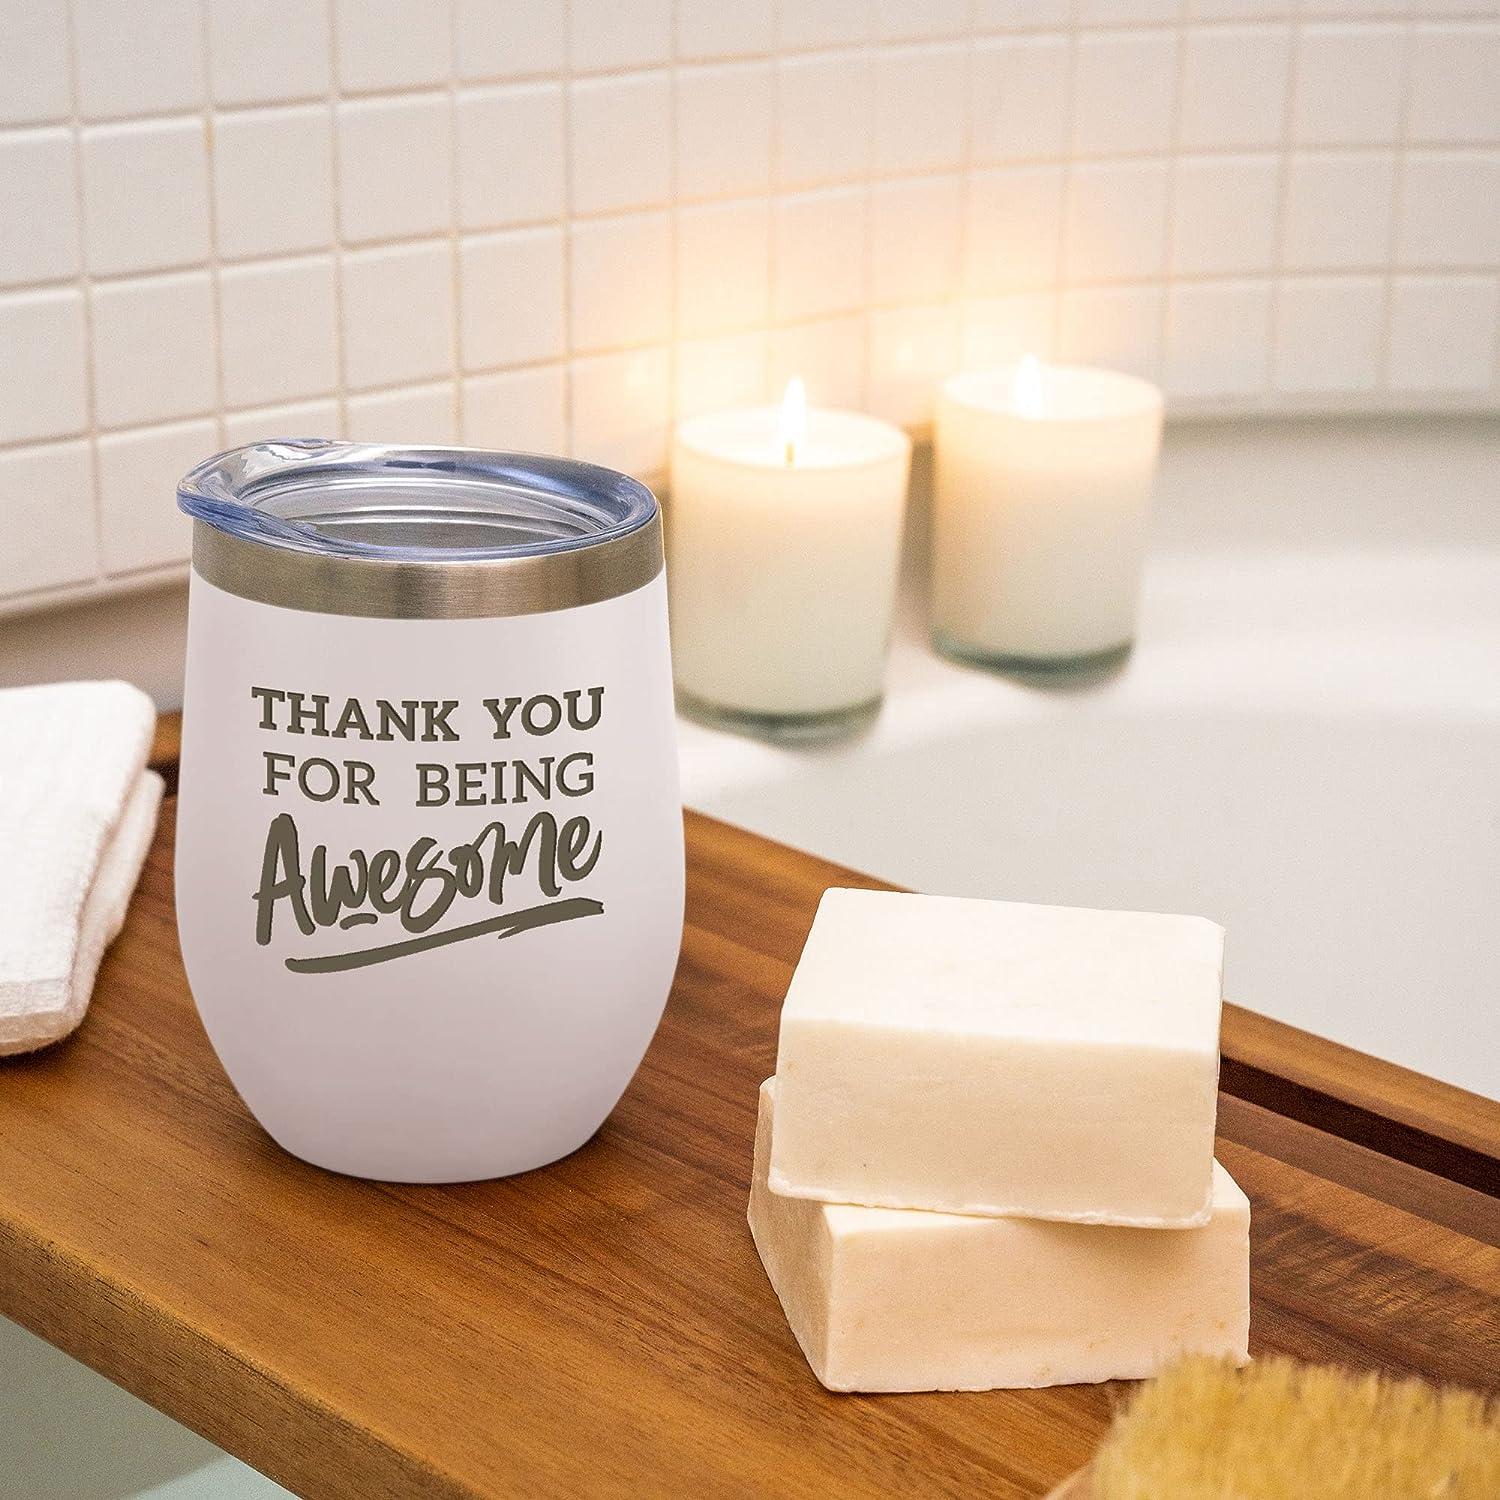 Top 8 places to buy thank you gifts for clients - Rebekah Read Creative